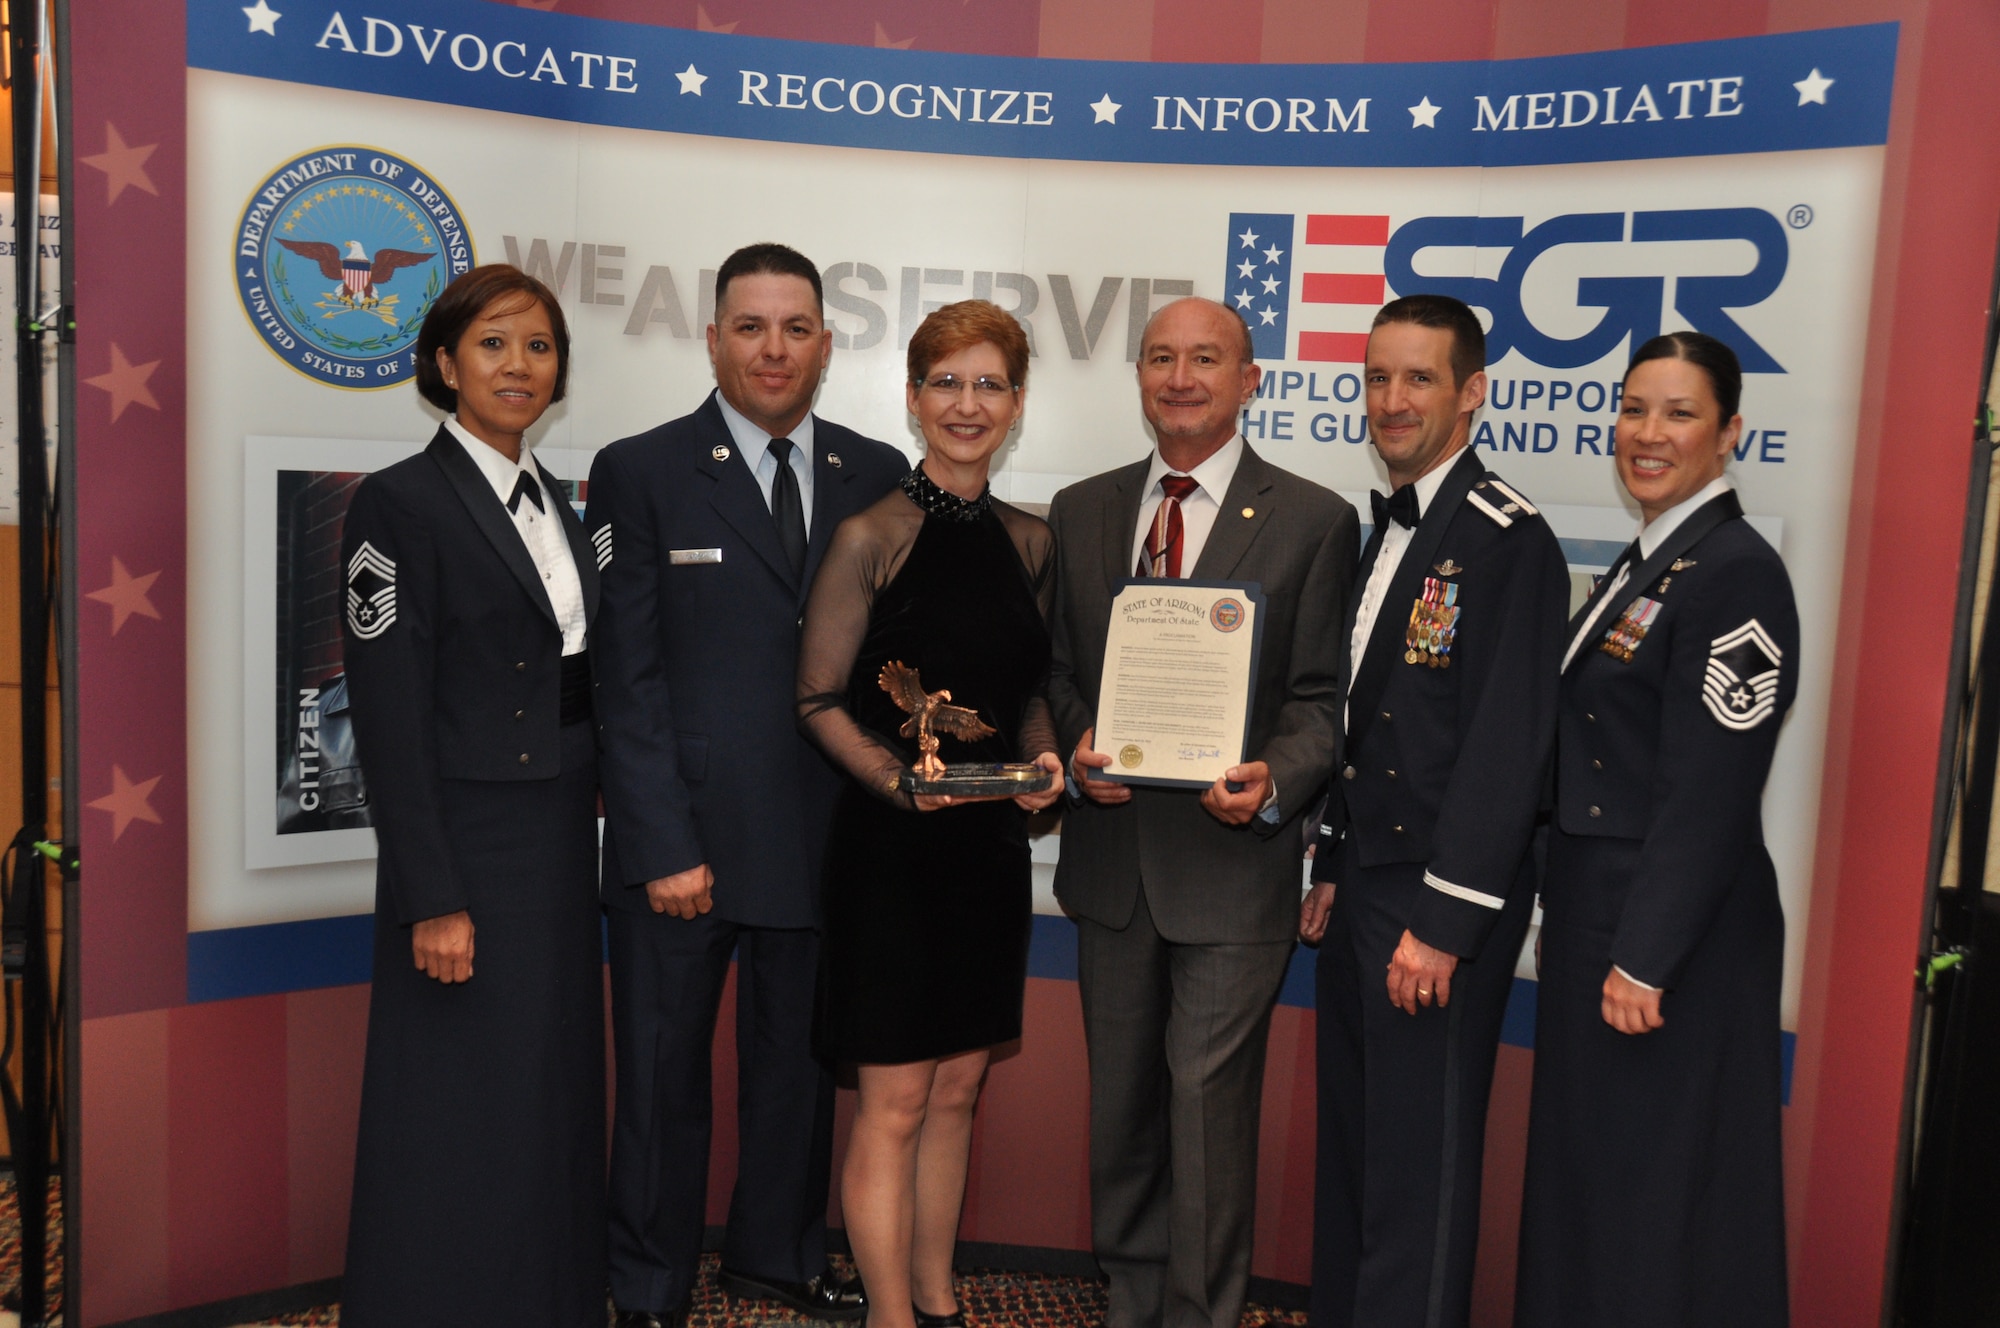 SRP was one of three distinguished with the ESGR Pro Patria Award in recognition of extraordinary support of its employees who serve in the Arizona National Guard and Reserve.  And is one of Arizona’s top three employers competing for the Secretary of Defense Employer Freedom Award at the National level. (Courtesy Photo)